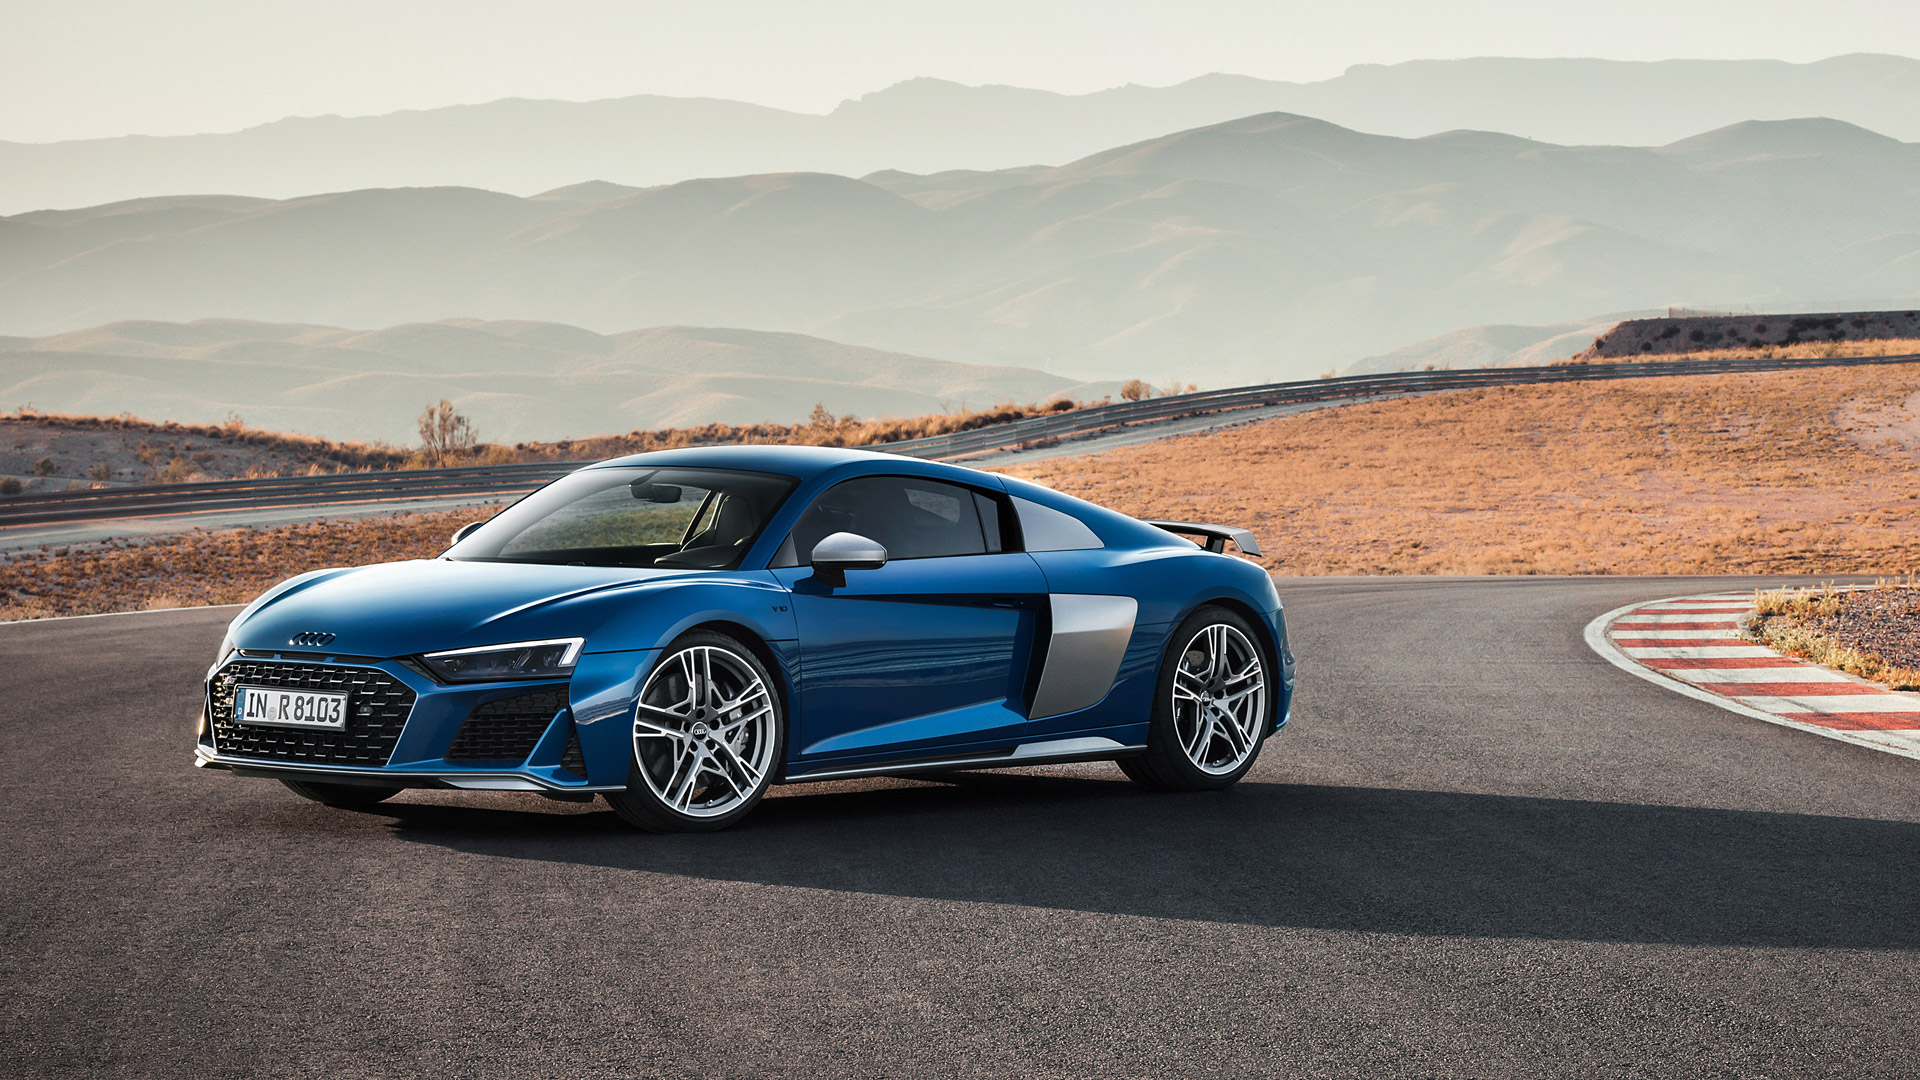 Audi R8 Wallpaper For Android